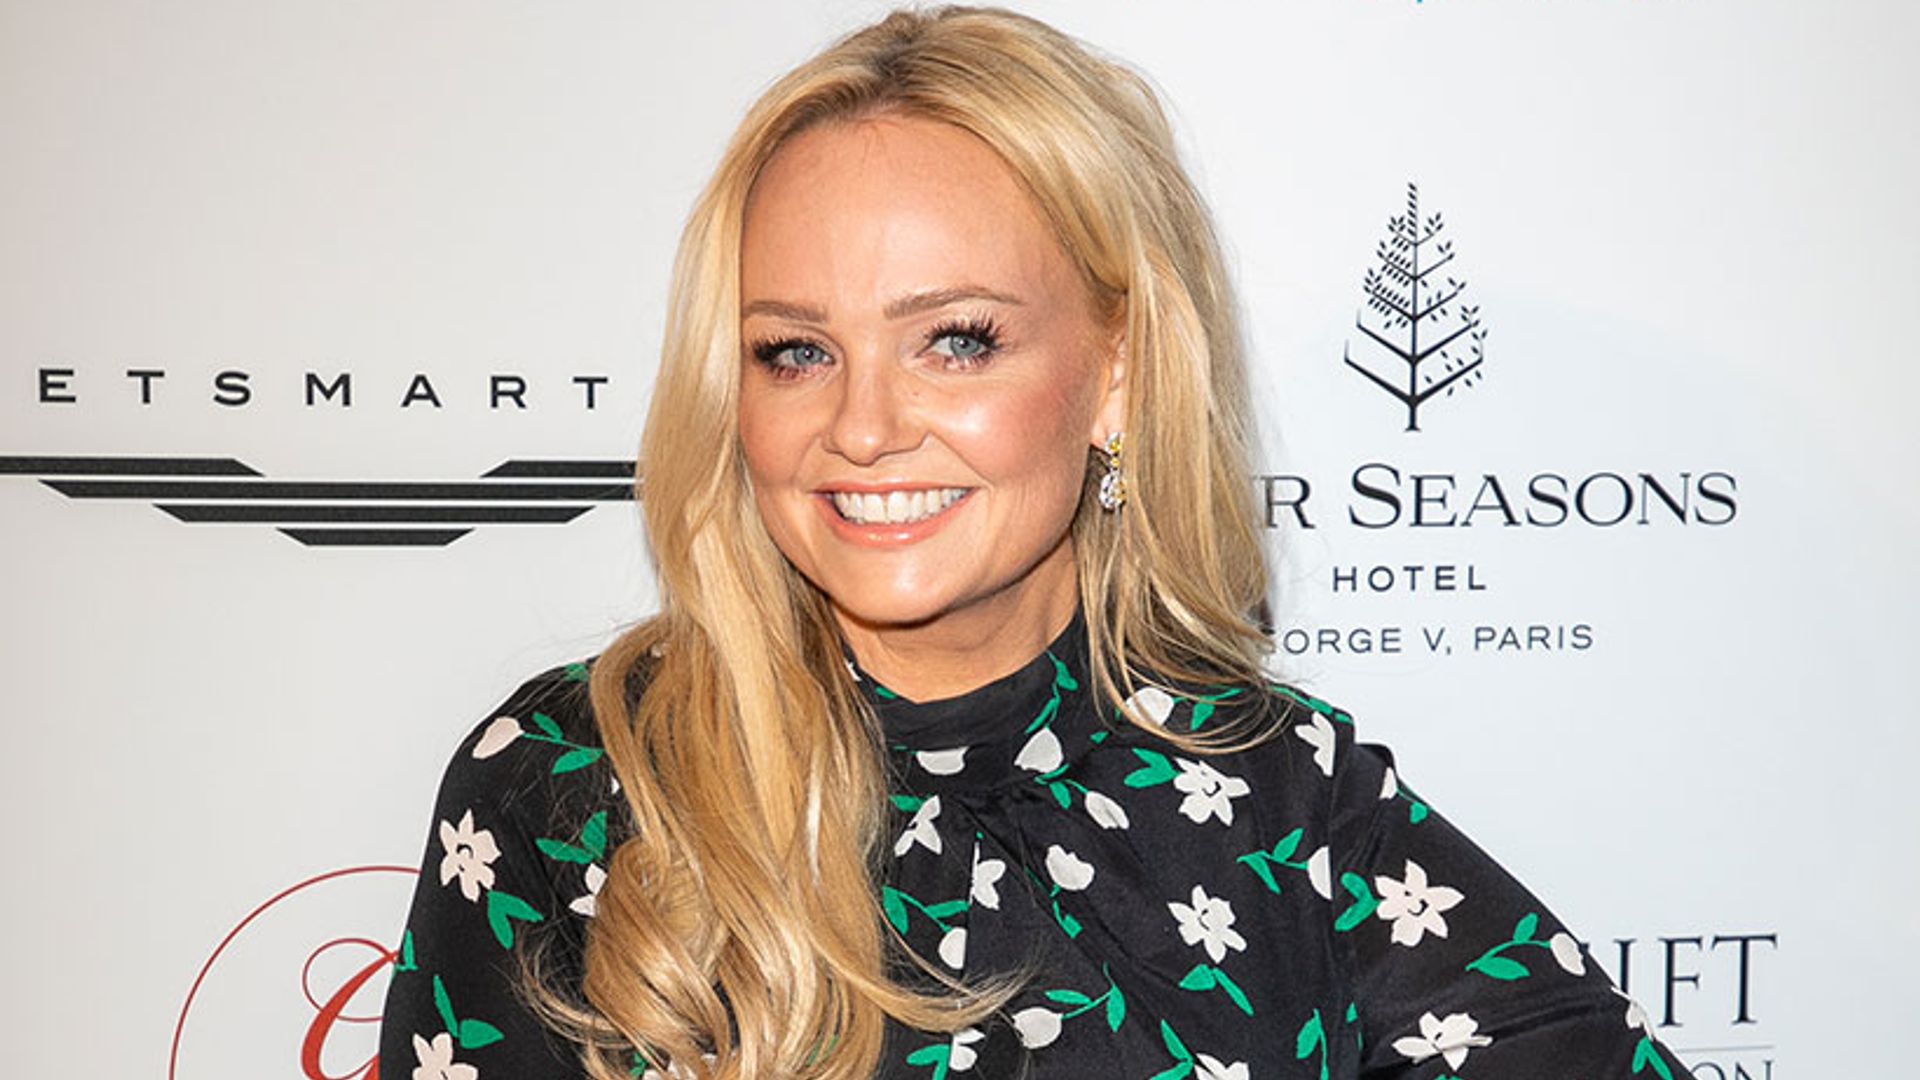 Emma Bunton just shared some life-changing news – and it's so exciting!